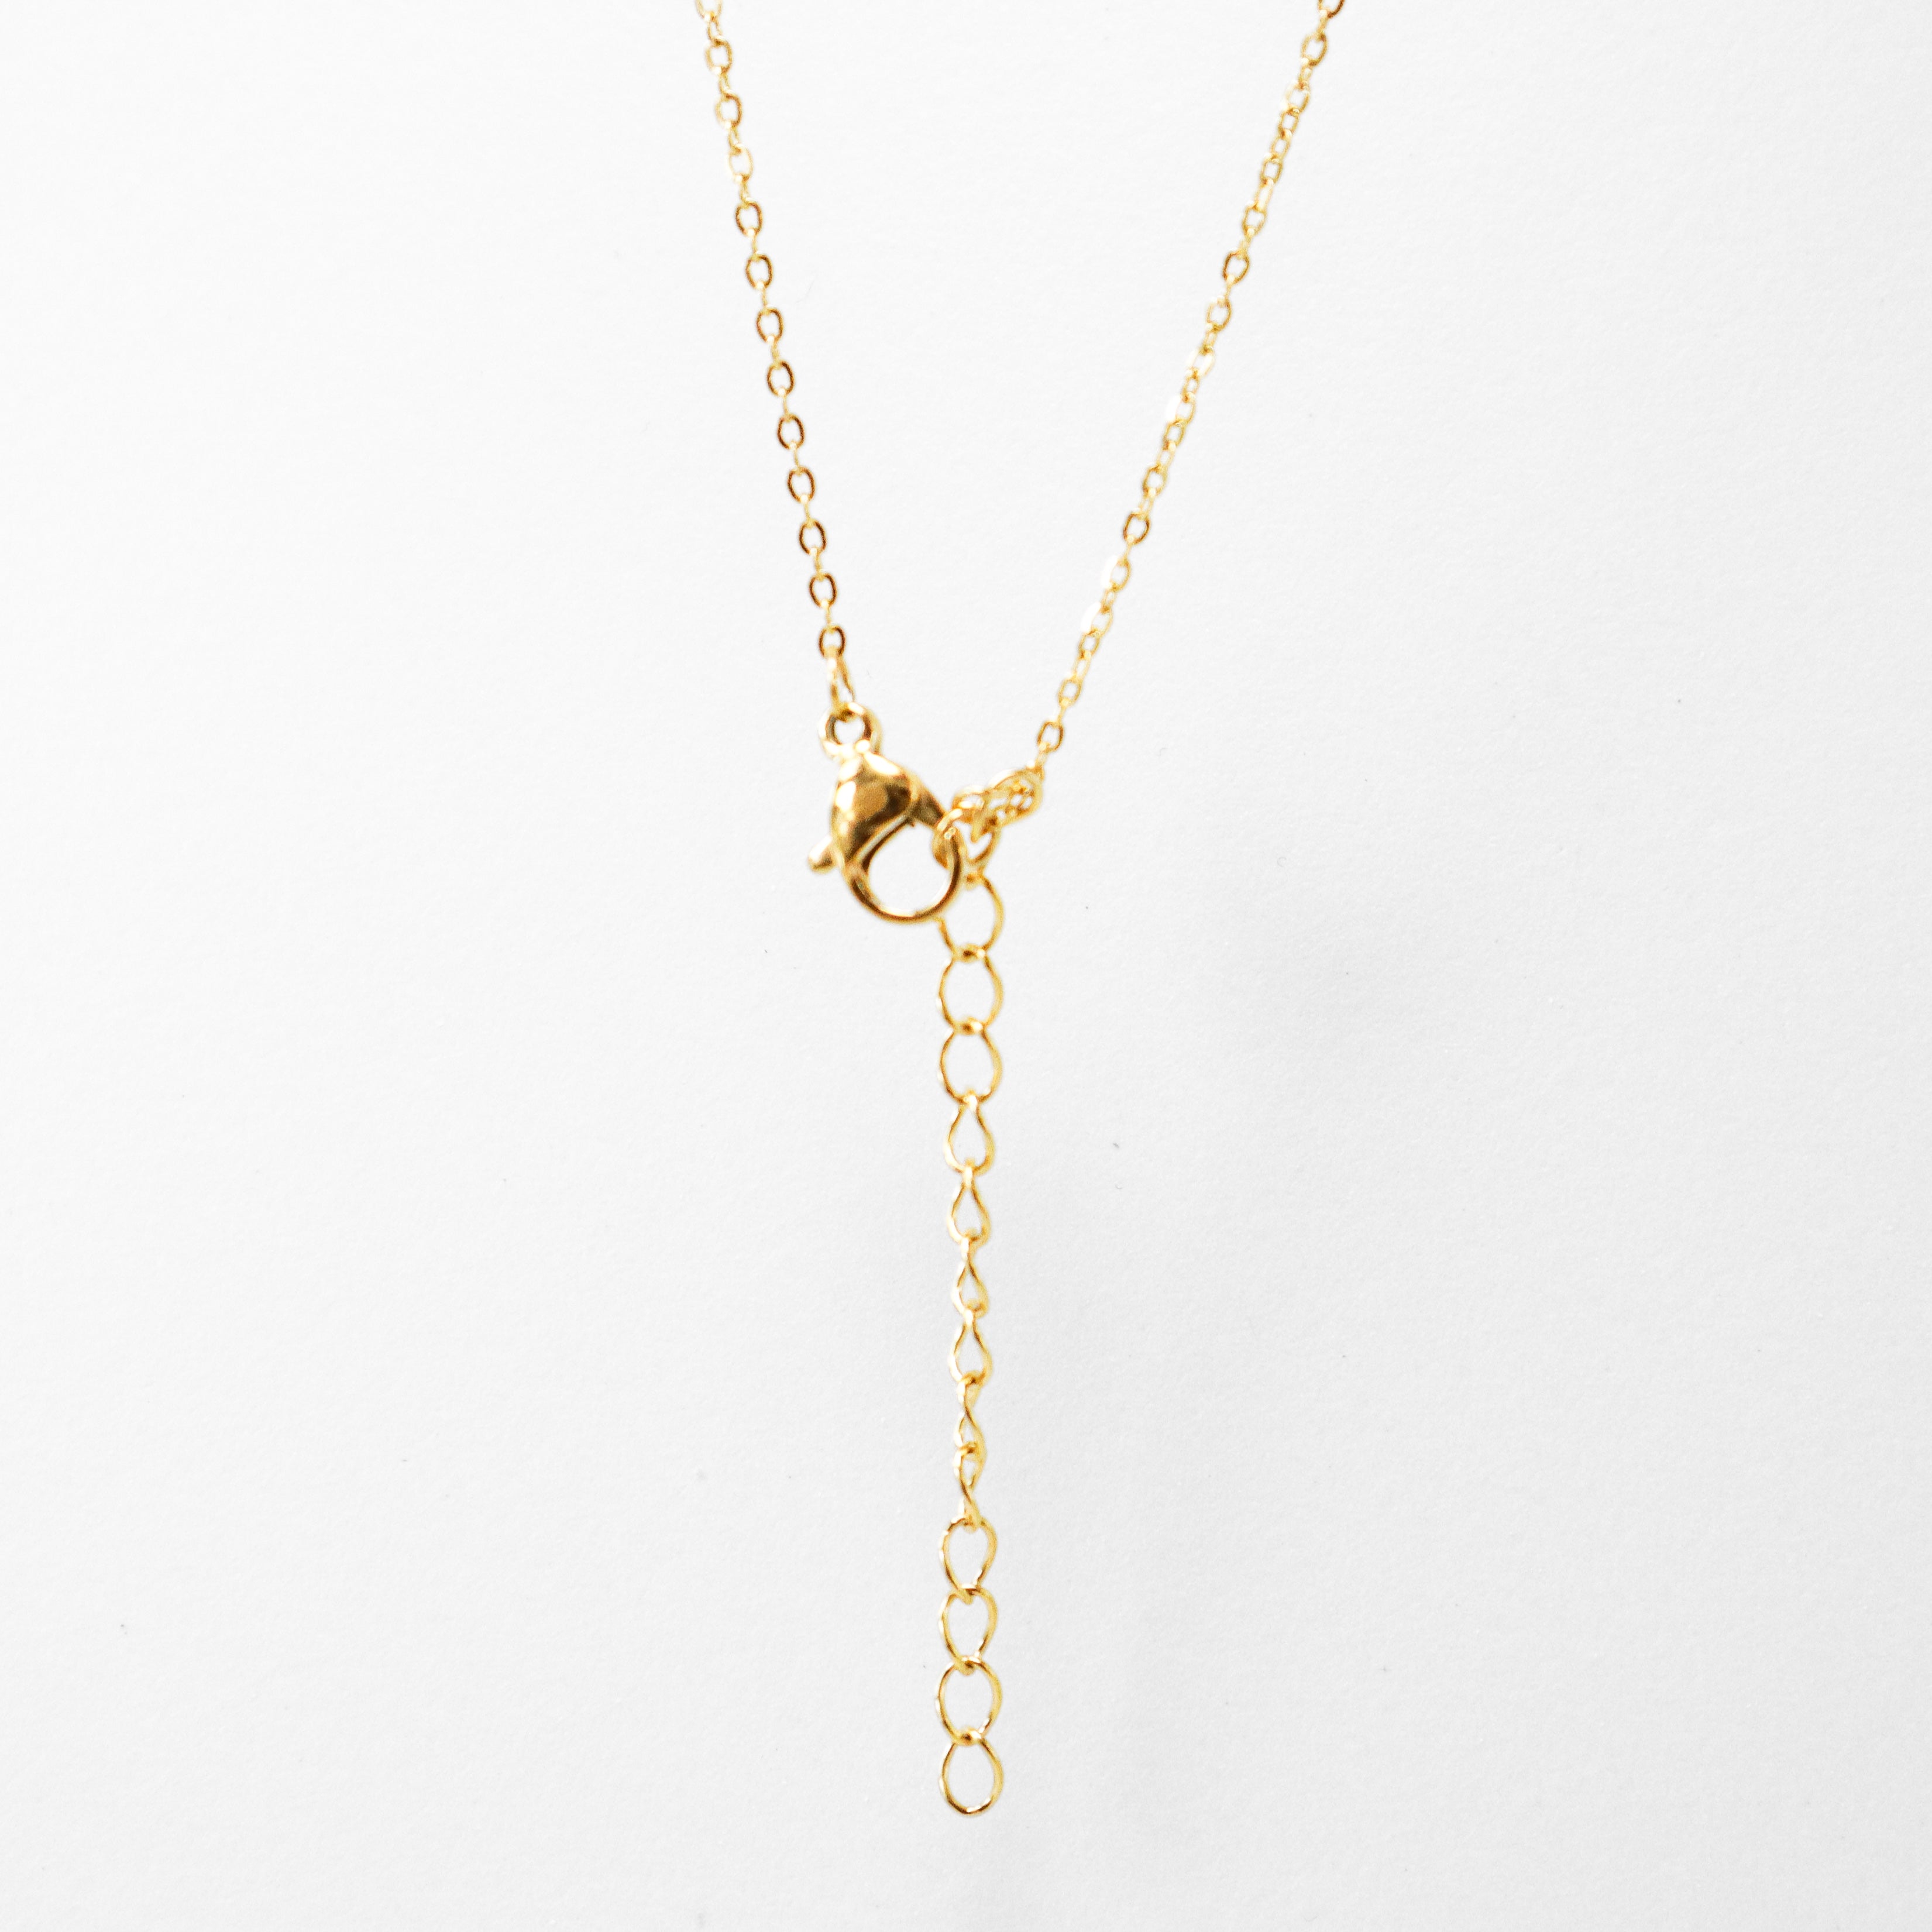 Dainty Gold Paw Print Necklace